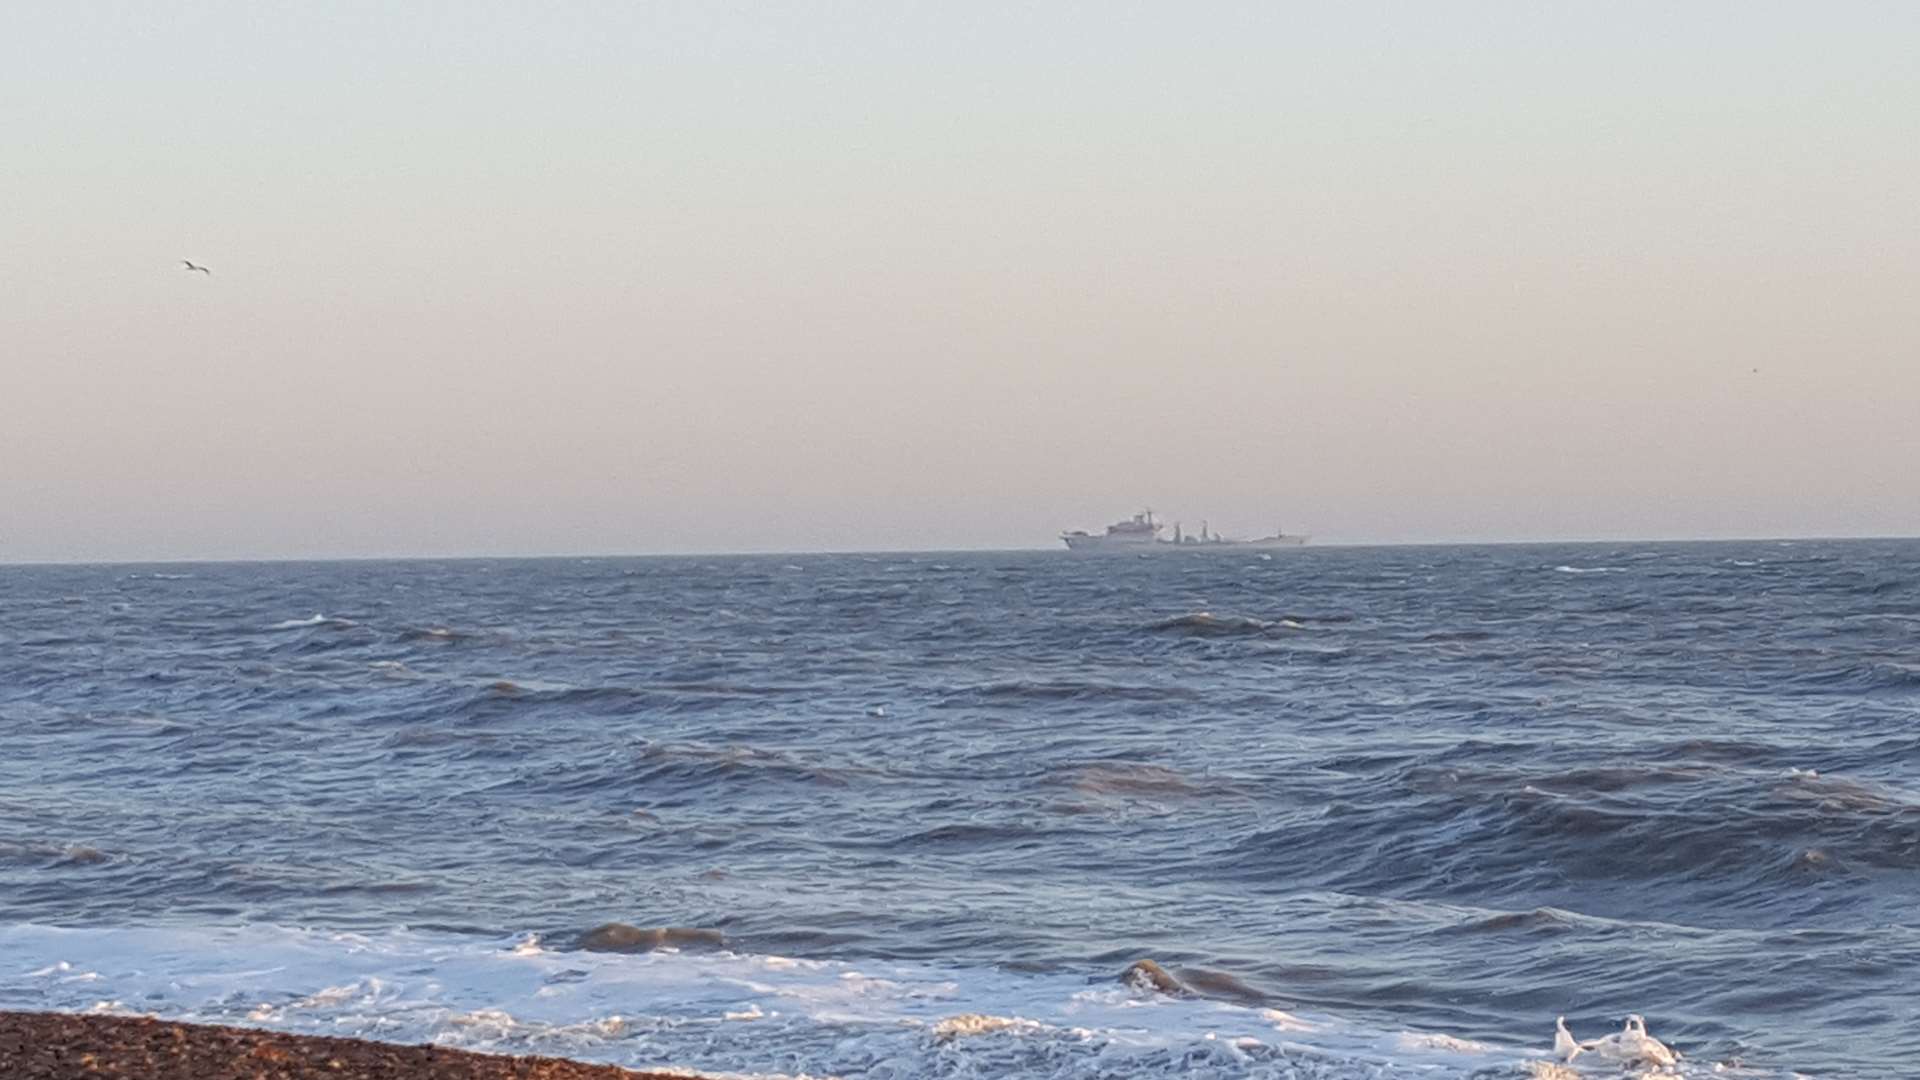 People were concerned after spotting the large ship off the Shepway coast